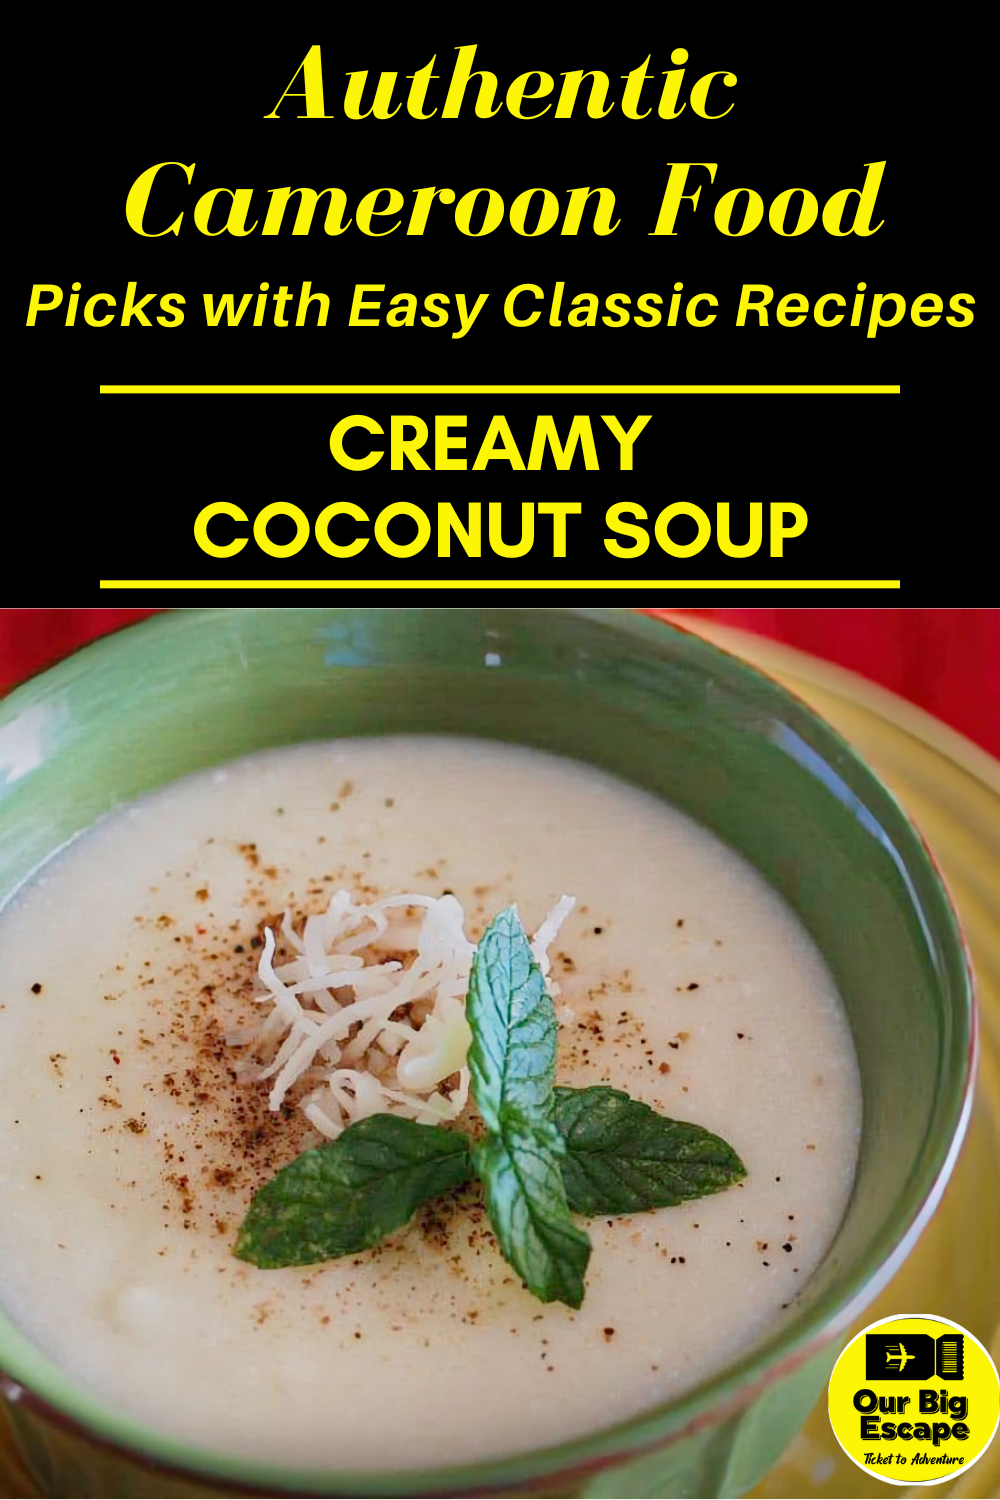 Creamy Coconut Soup - 14 Authentic Cameroon Food Picks With Easy Classic Recipes